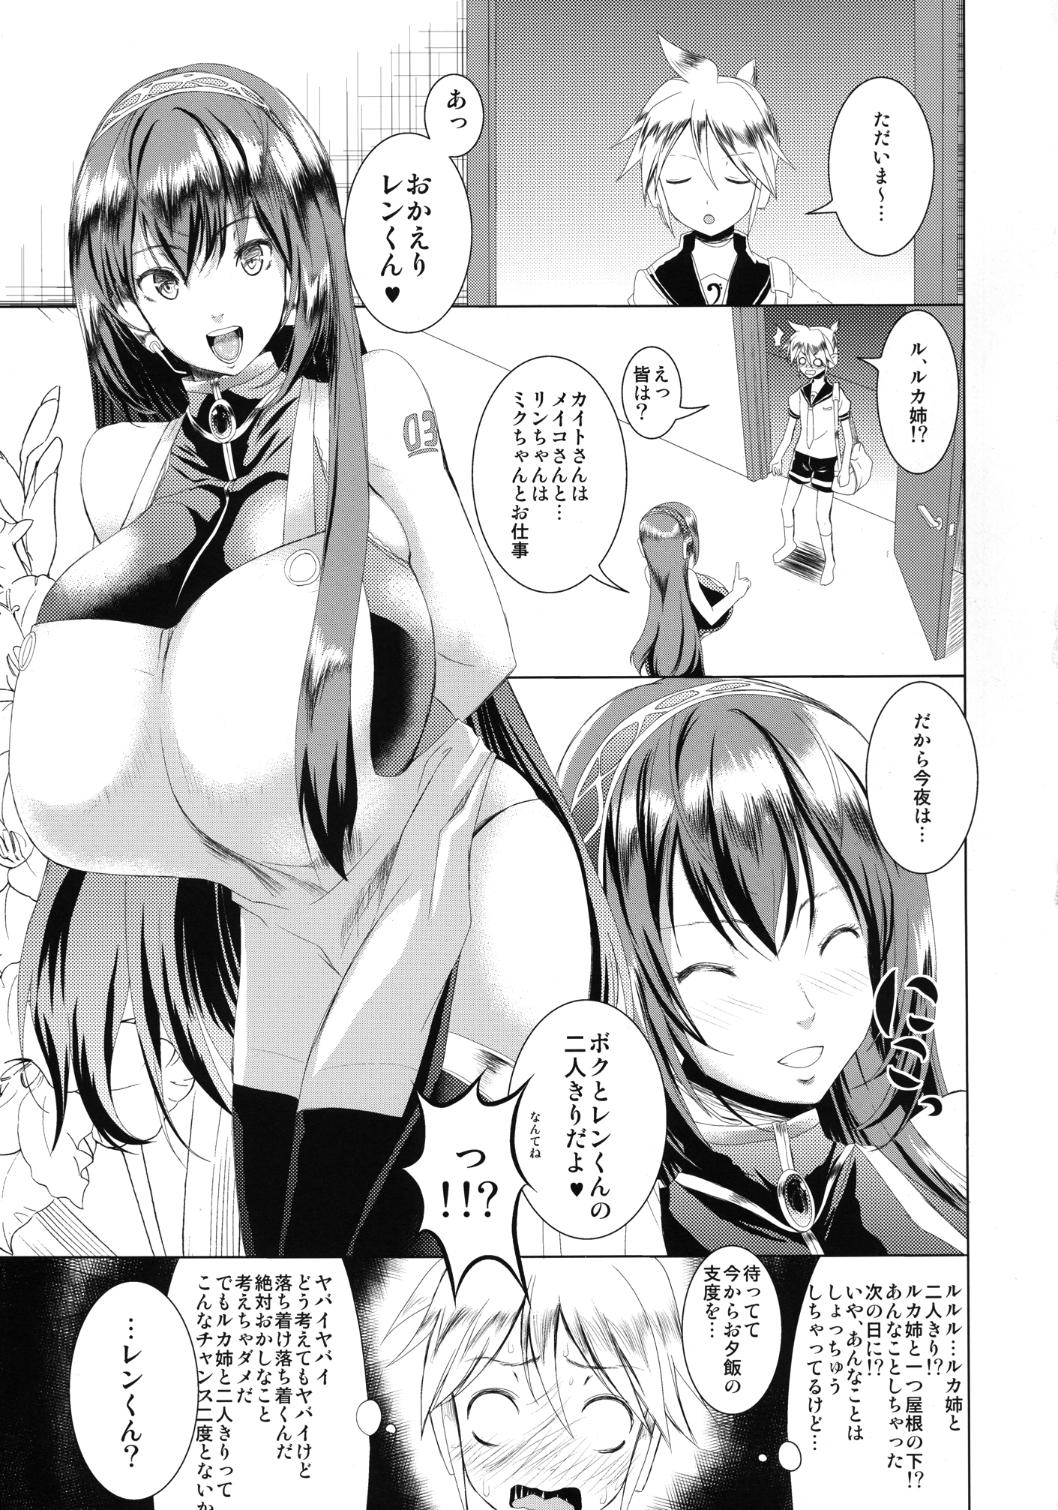 Young Tits Just Be Breasts - Vocaloid Delicia - Page 5